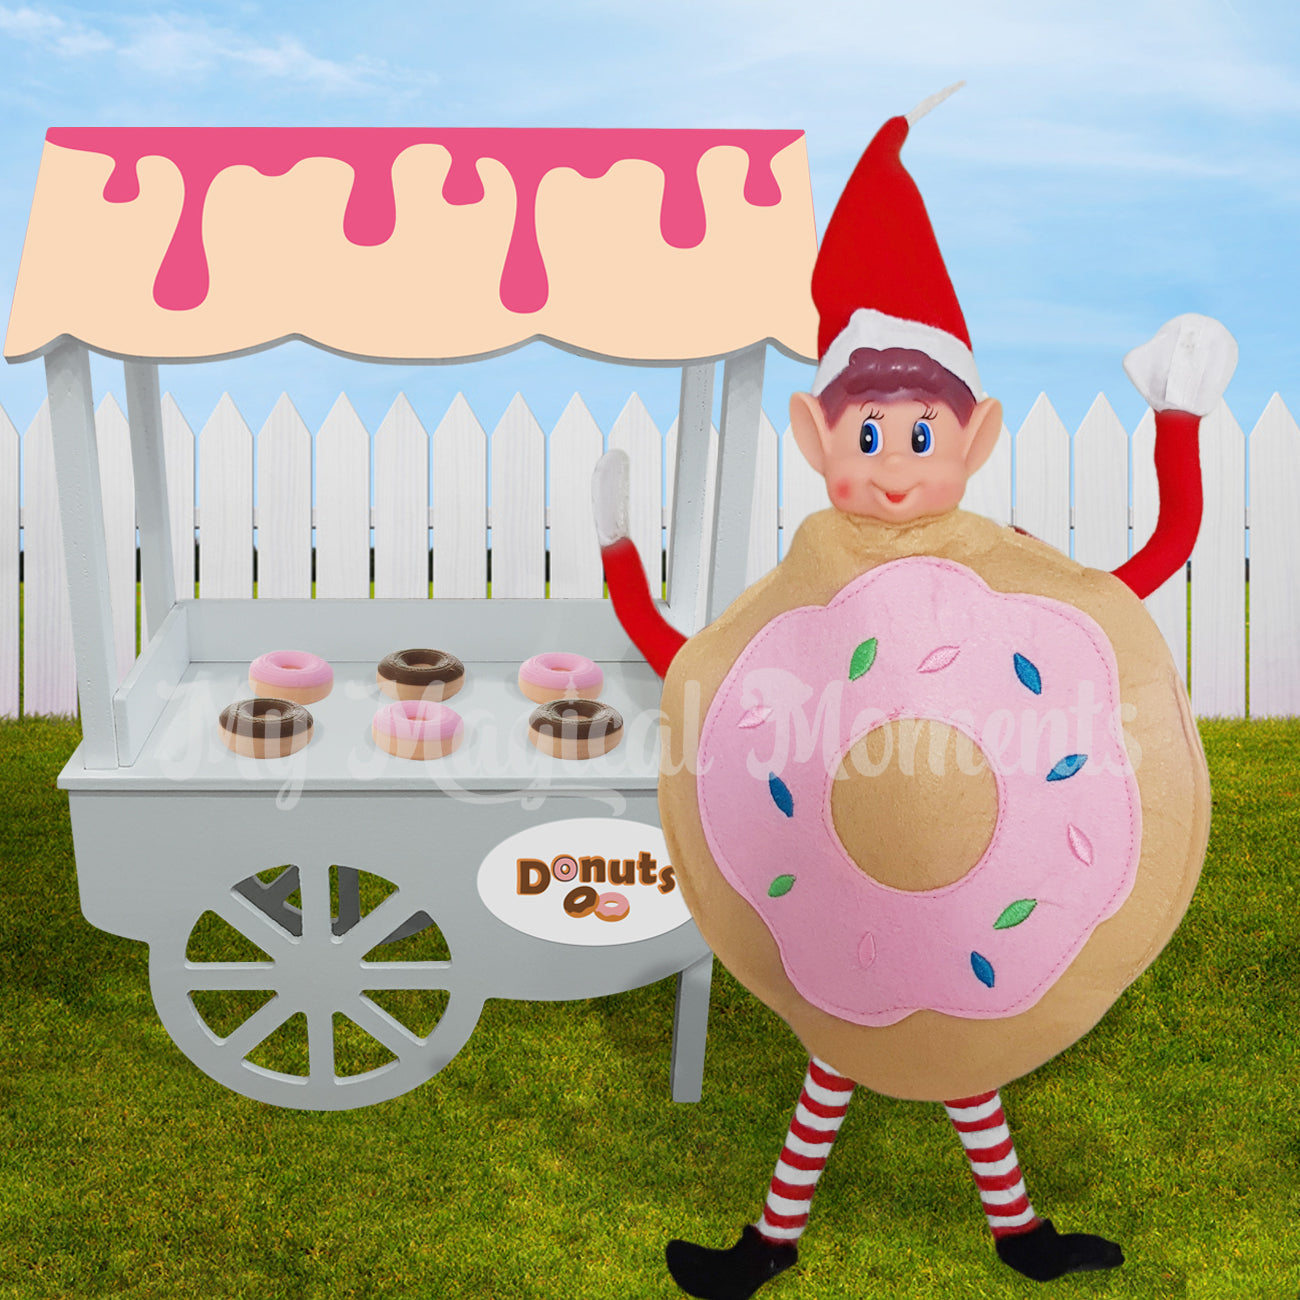 Elves behavin badly wearing a pink donut costume selling doughnuts